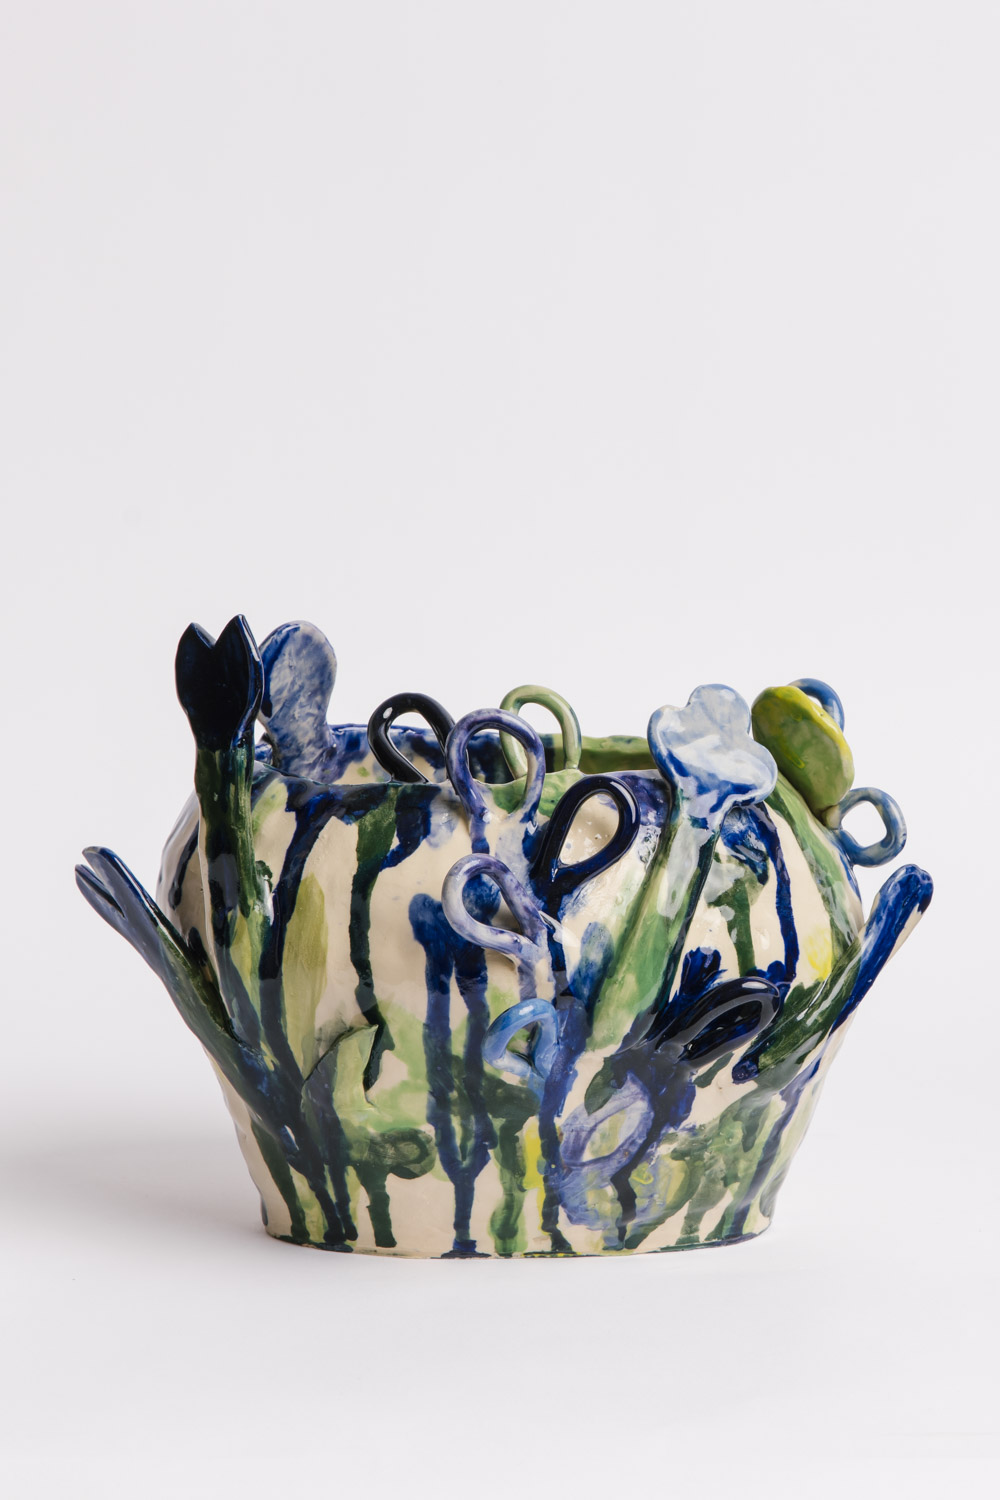 Hand built ceramic vase with attached flower shapes to the surface and painted in expressive underglazes in greens and blues, by Susan Buret, photo by Samee Lapham